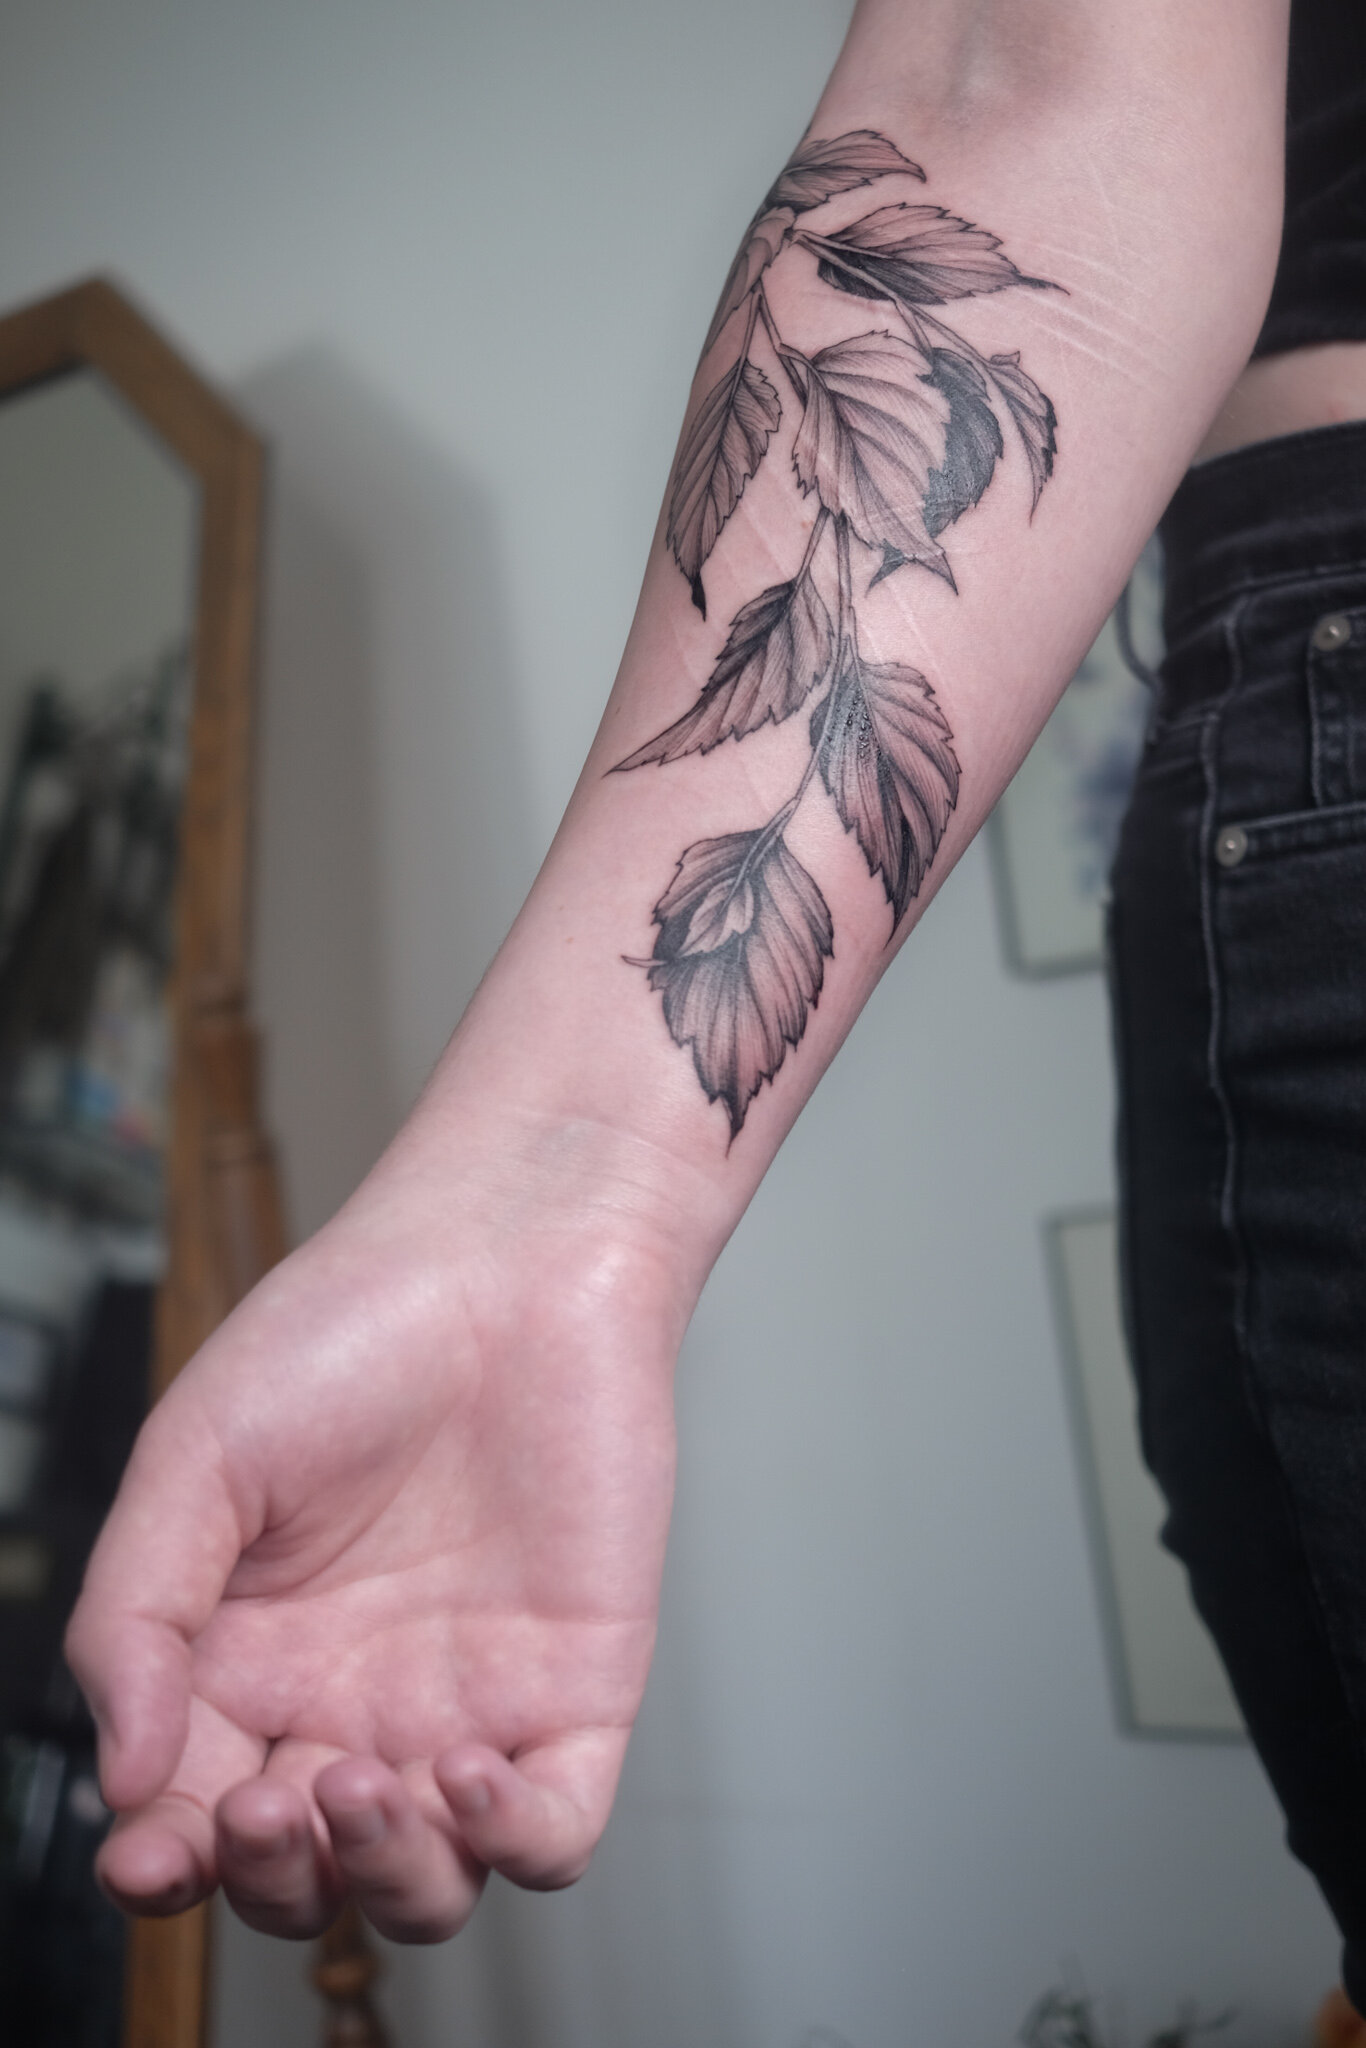 Why Foliage Tattoos Have Become So Popular With The Fashion Set